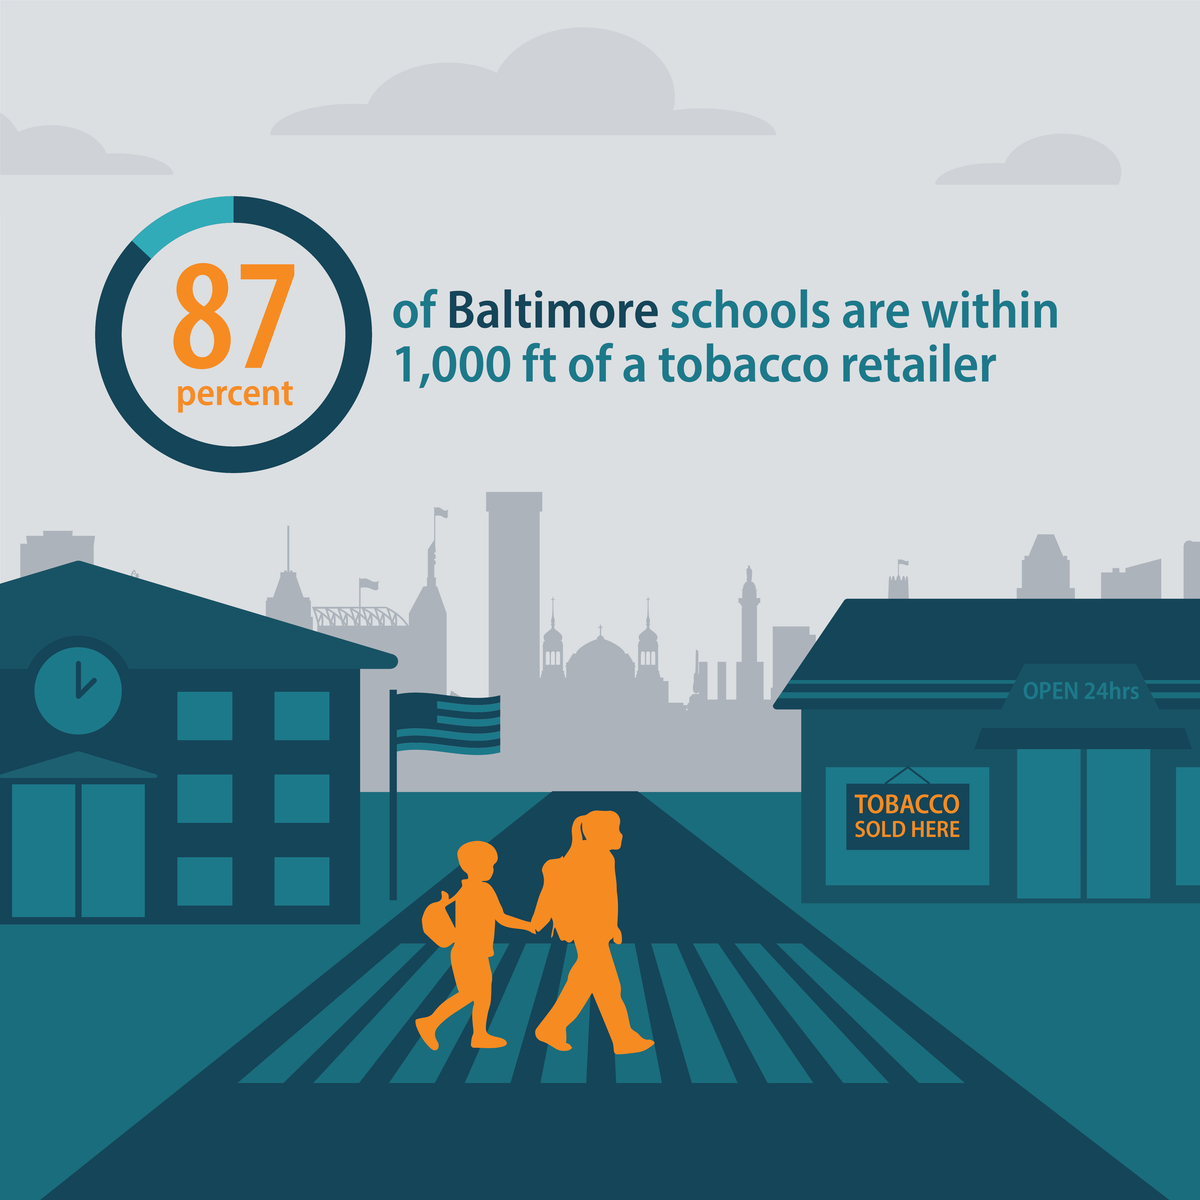 87 percent of Baltimore schools are within 1,000 feet of a tobacco retailer